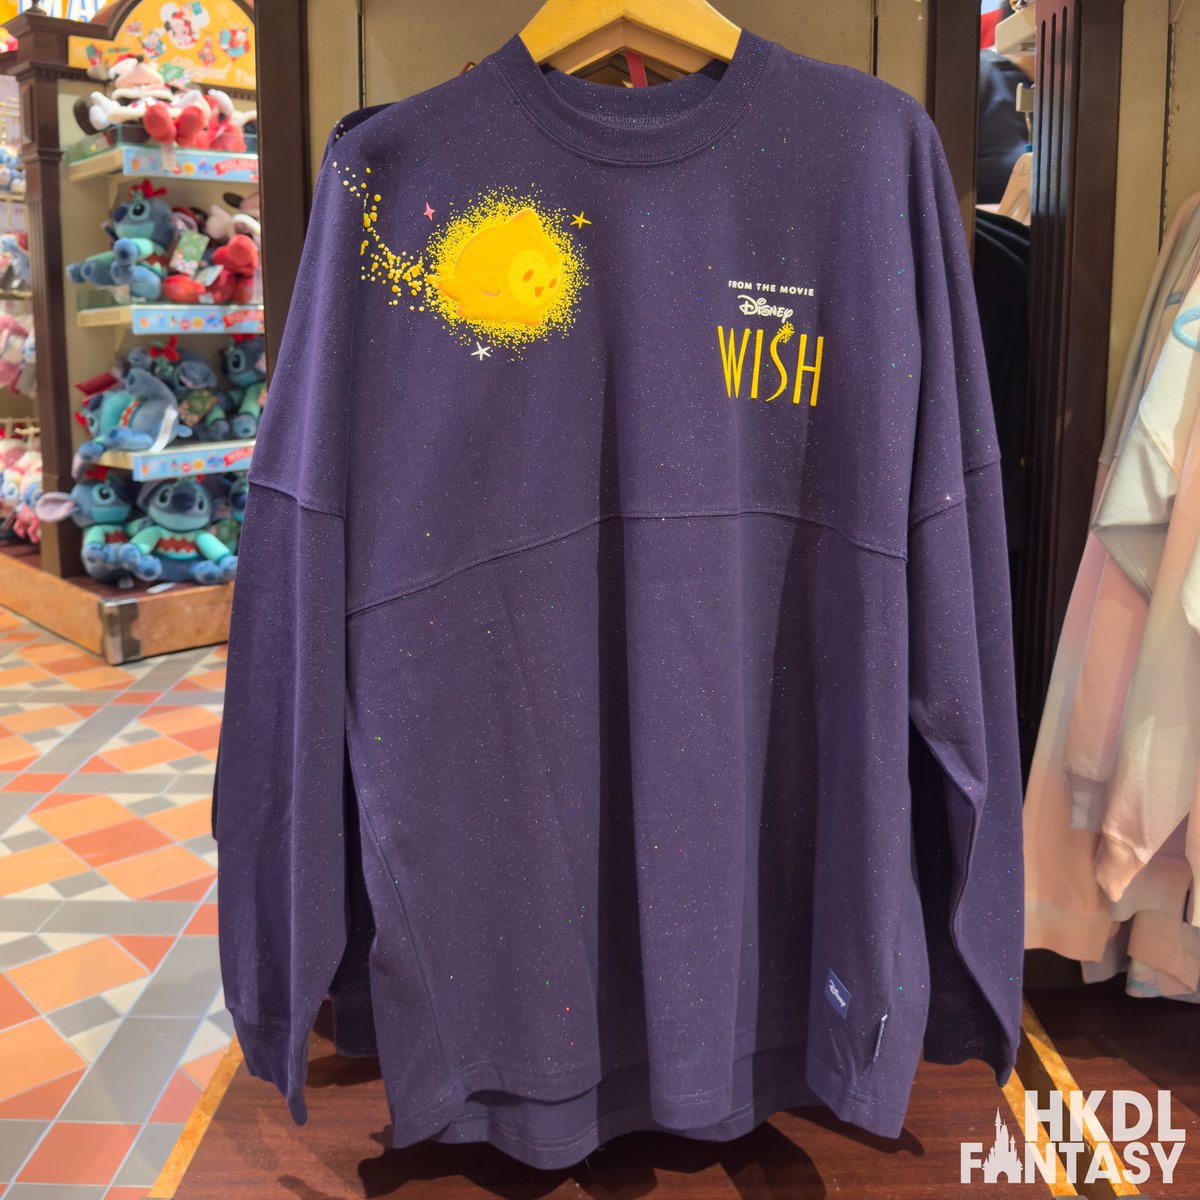 Two new Spirit Jerseys are now available at Hong Kong Disneyland, including a dreamy pastel design featuring the park logo and the castle and a design inspired by #Wish.

#HongKongDisneyland #hkdisneyland #HKDL #disneyparks #disney #香港ディズニーランド #ディズニー #SpiritJersey